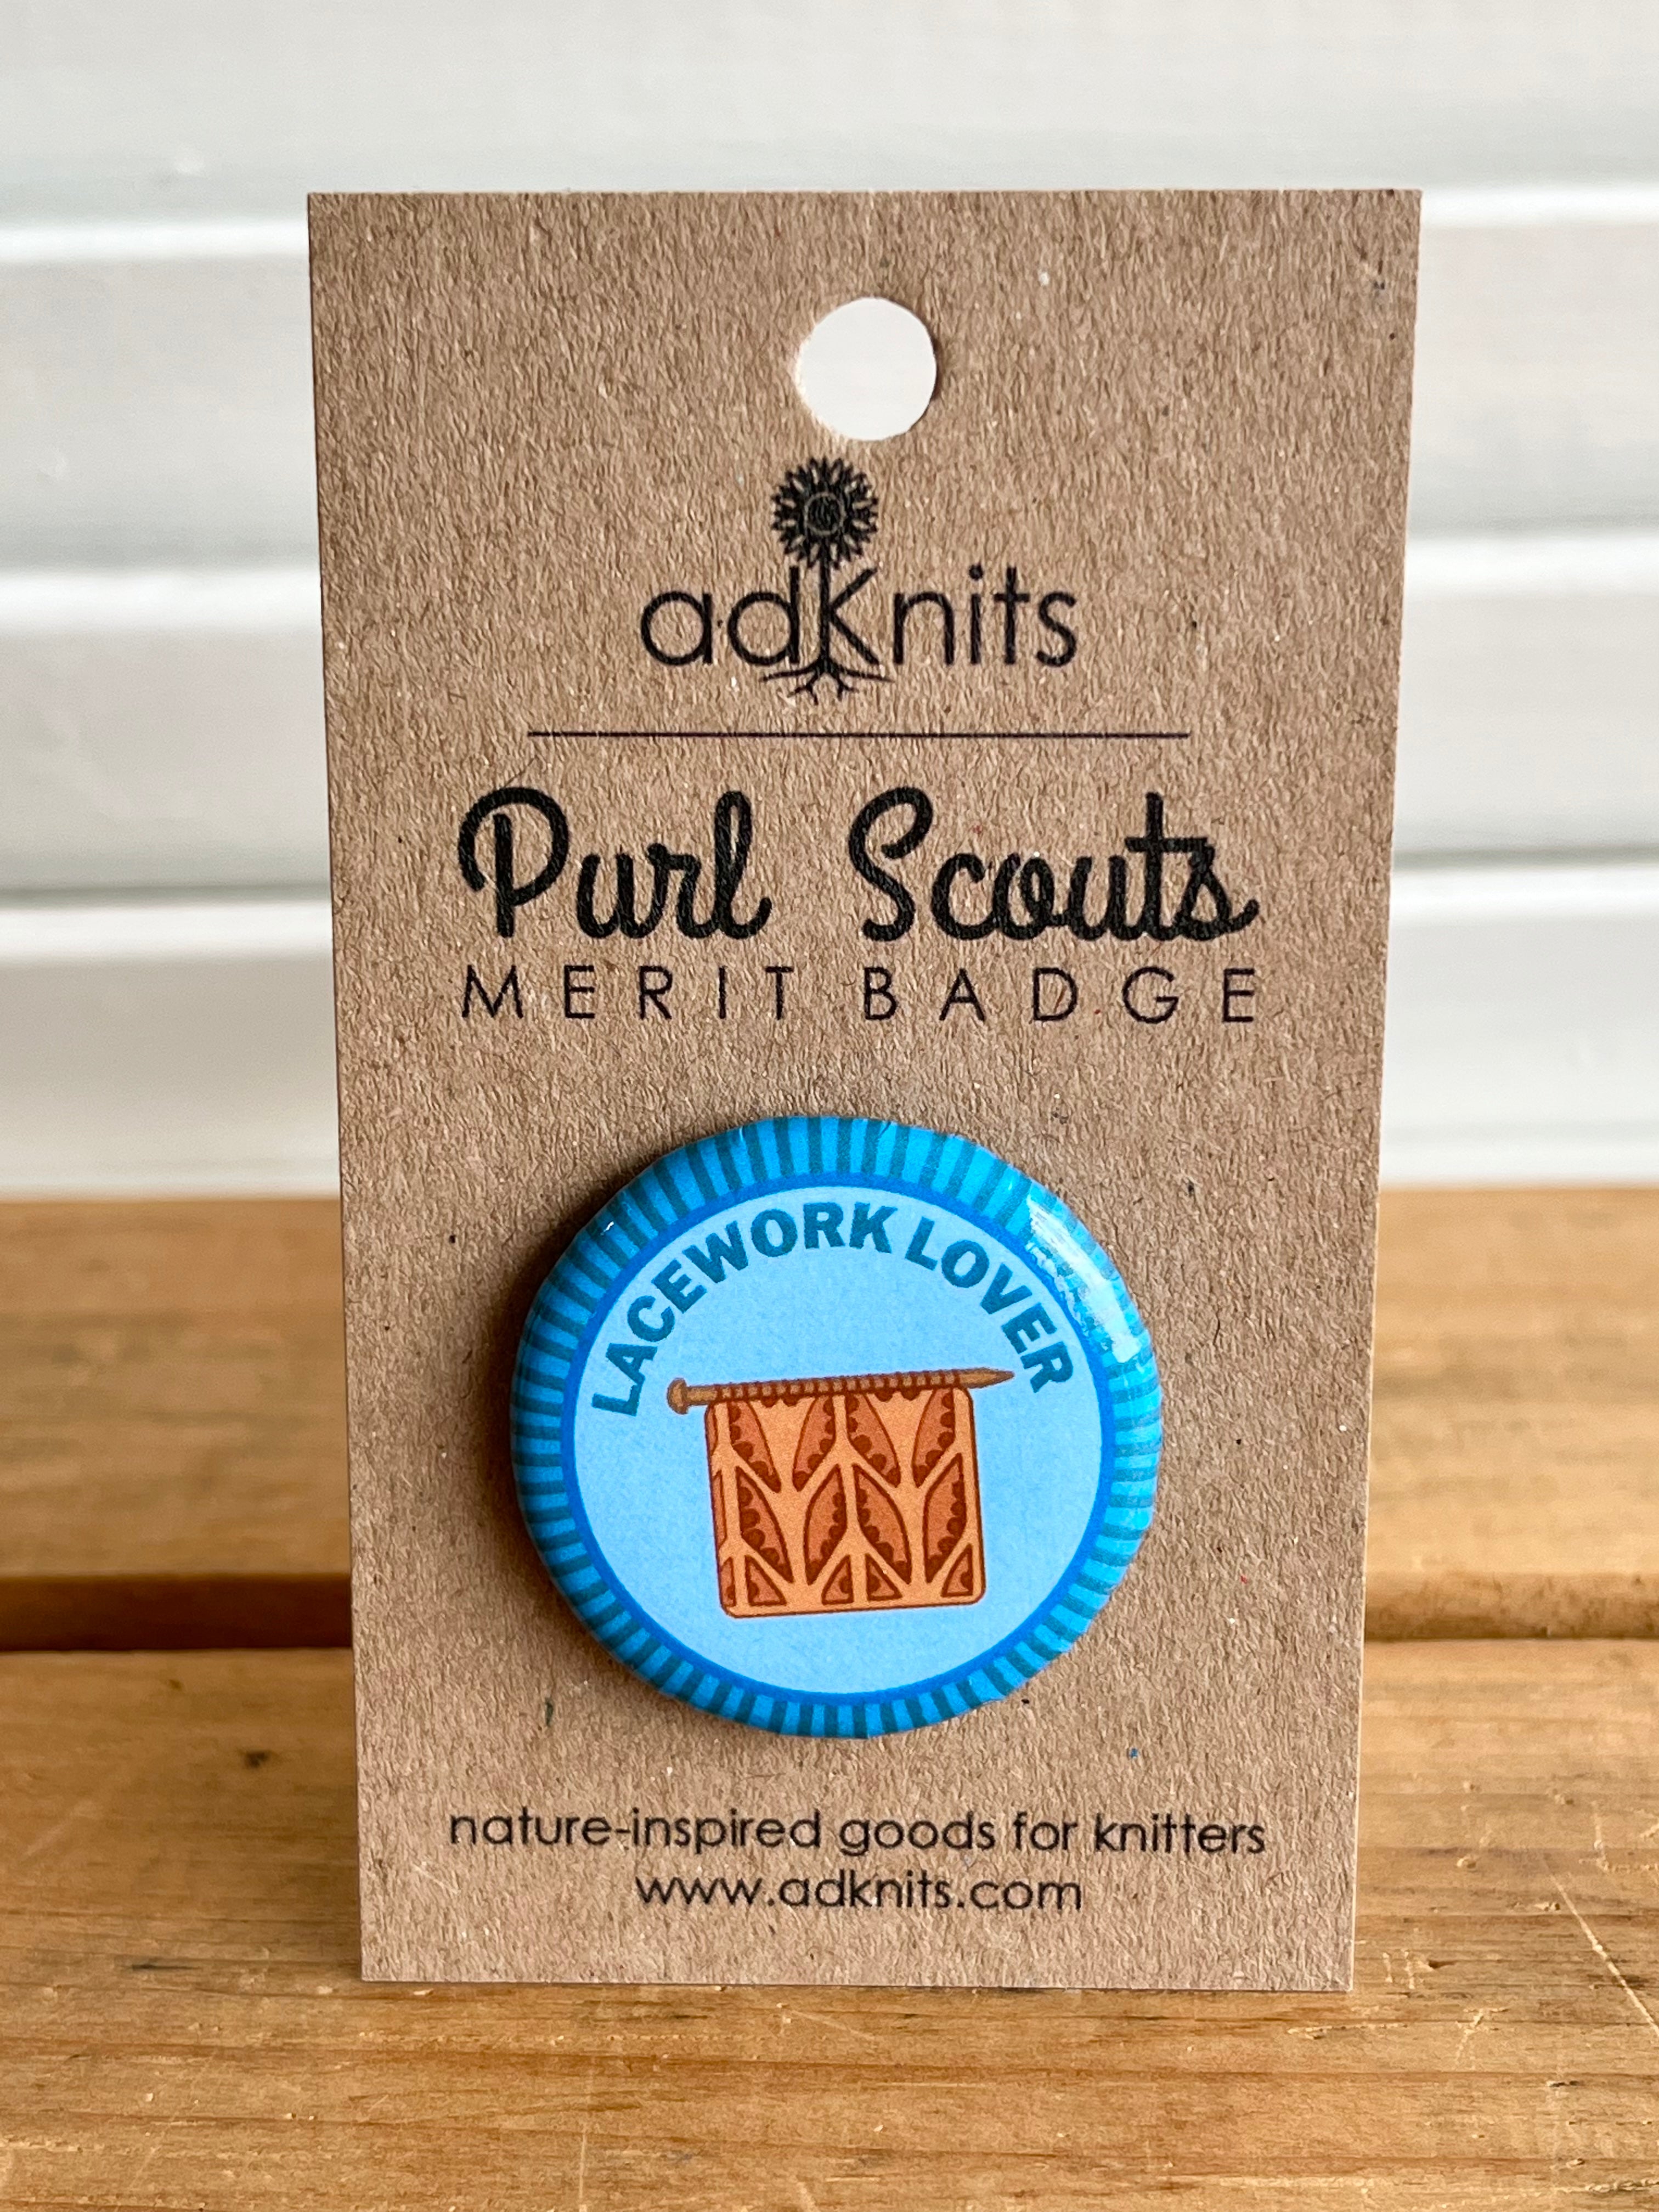 Lacework Lover - Purl Scouts Merit Badge